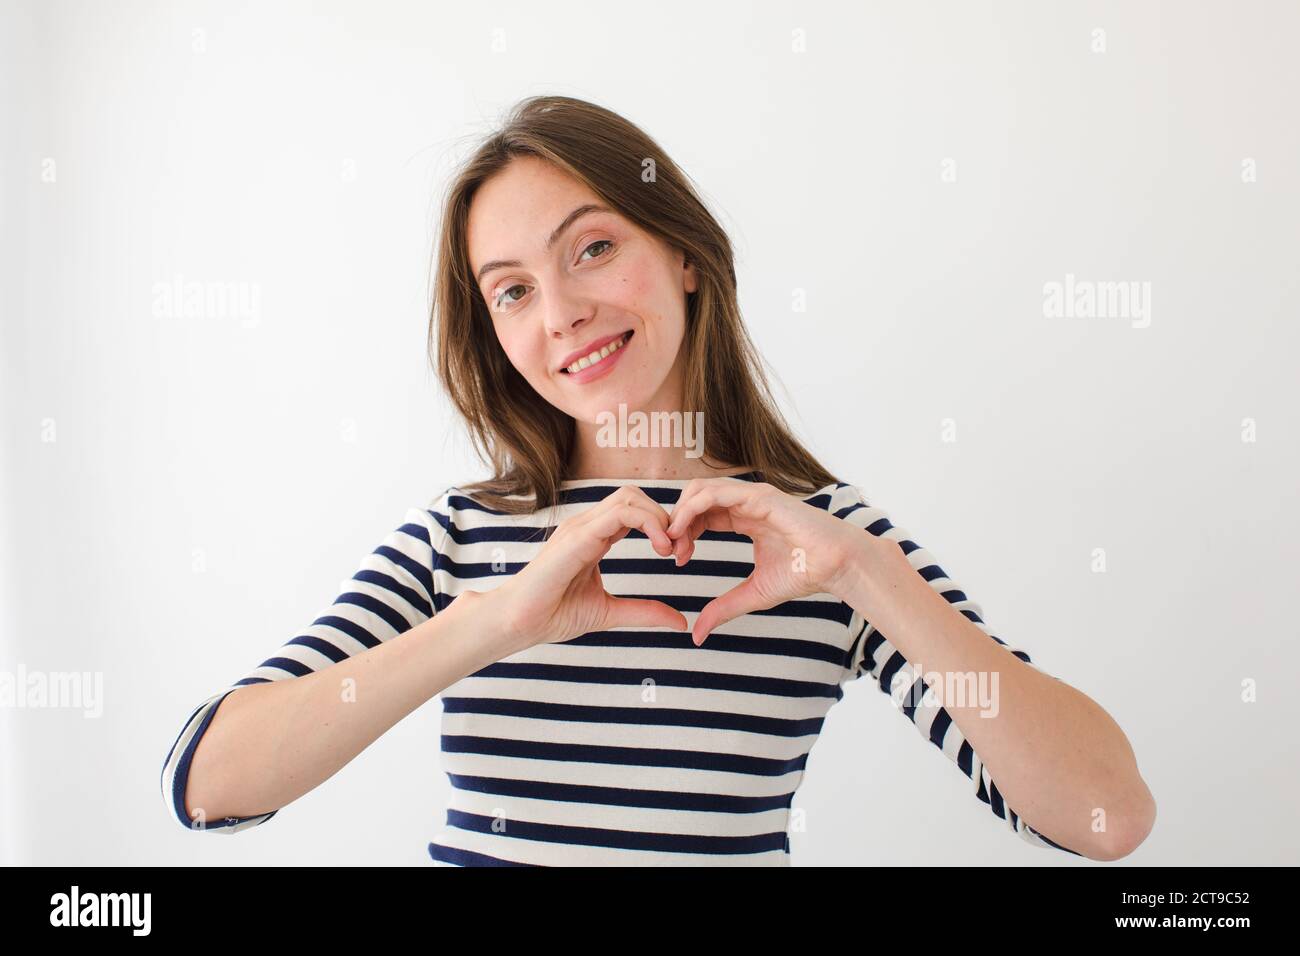 Charming woman showing heart gesture Stock Photo